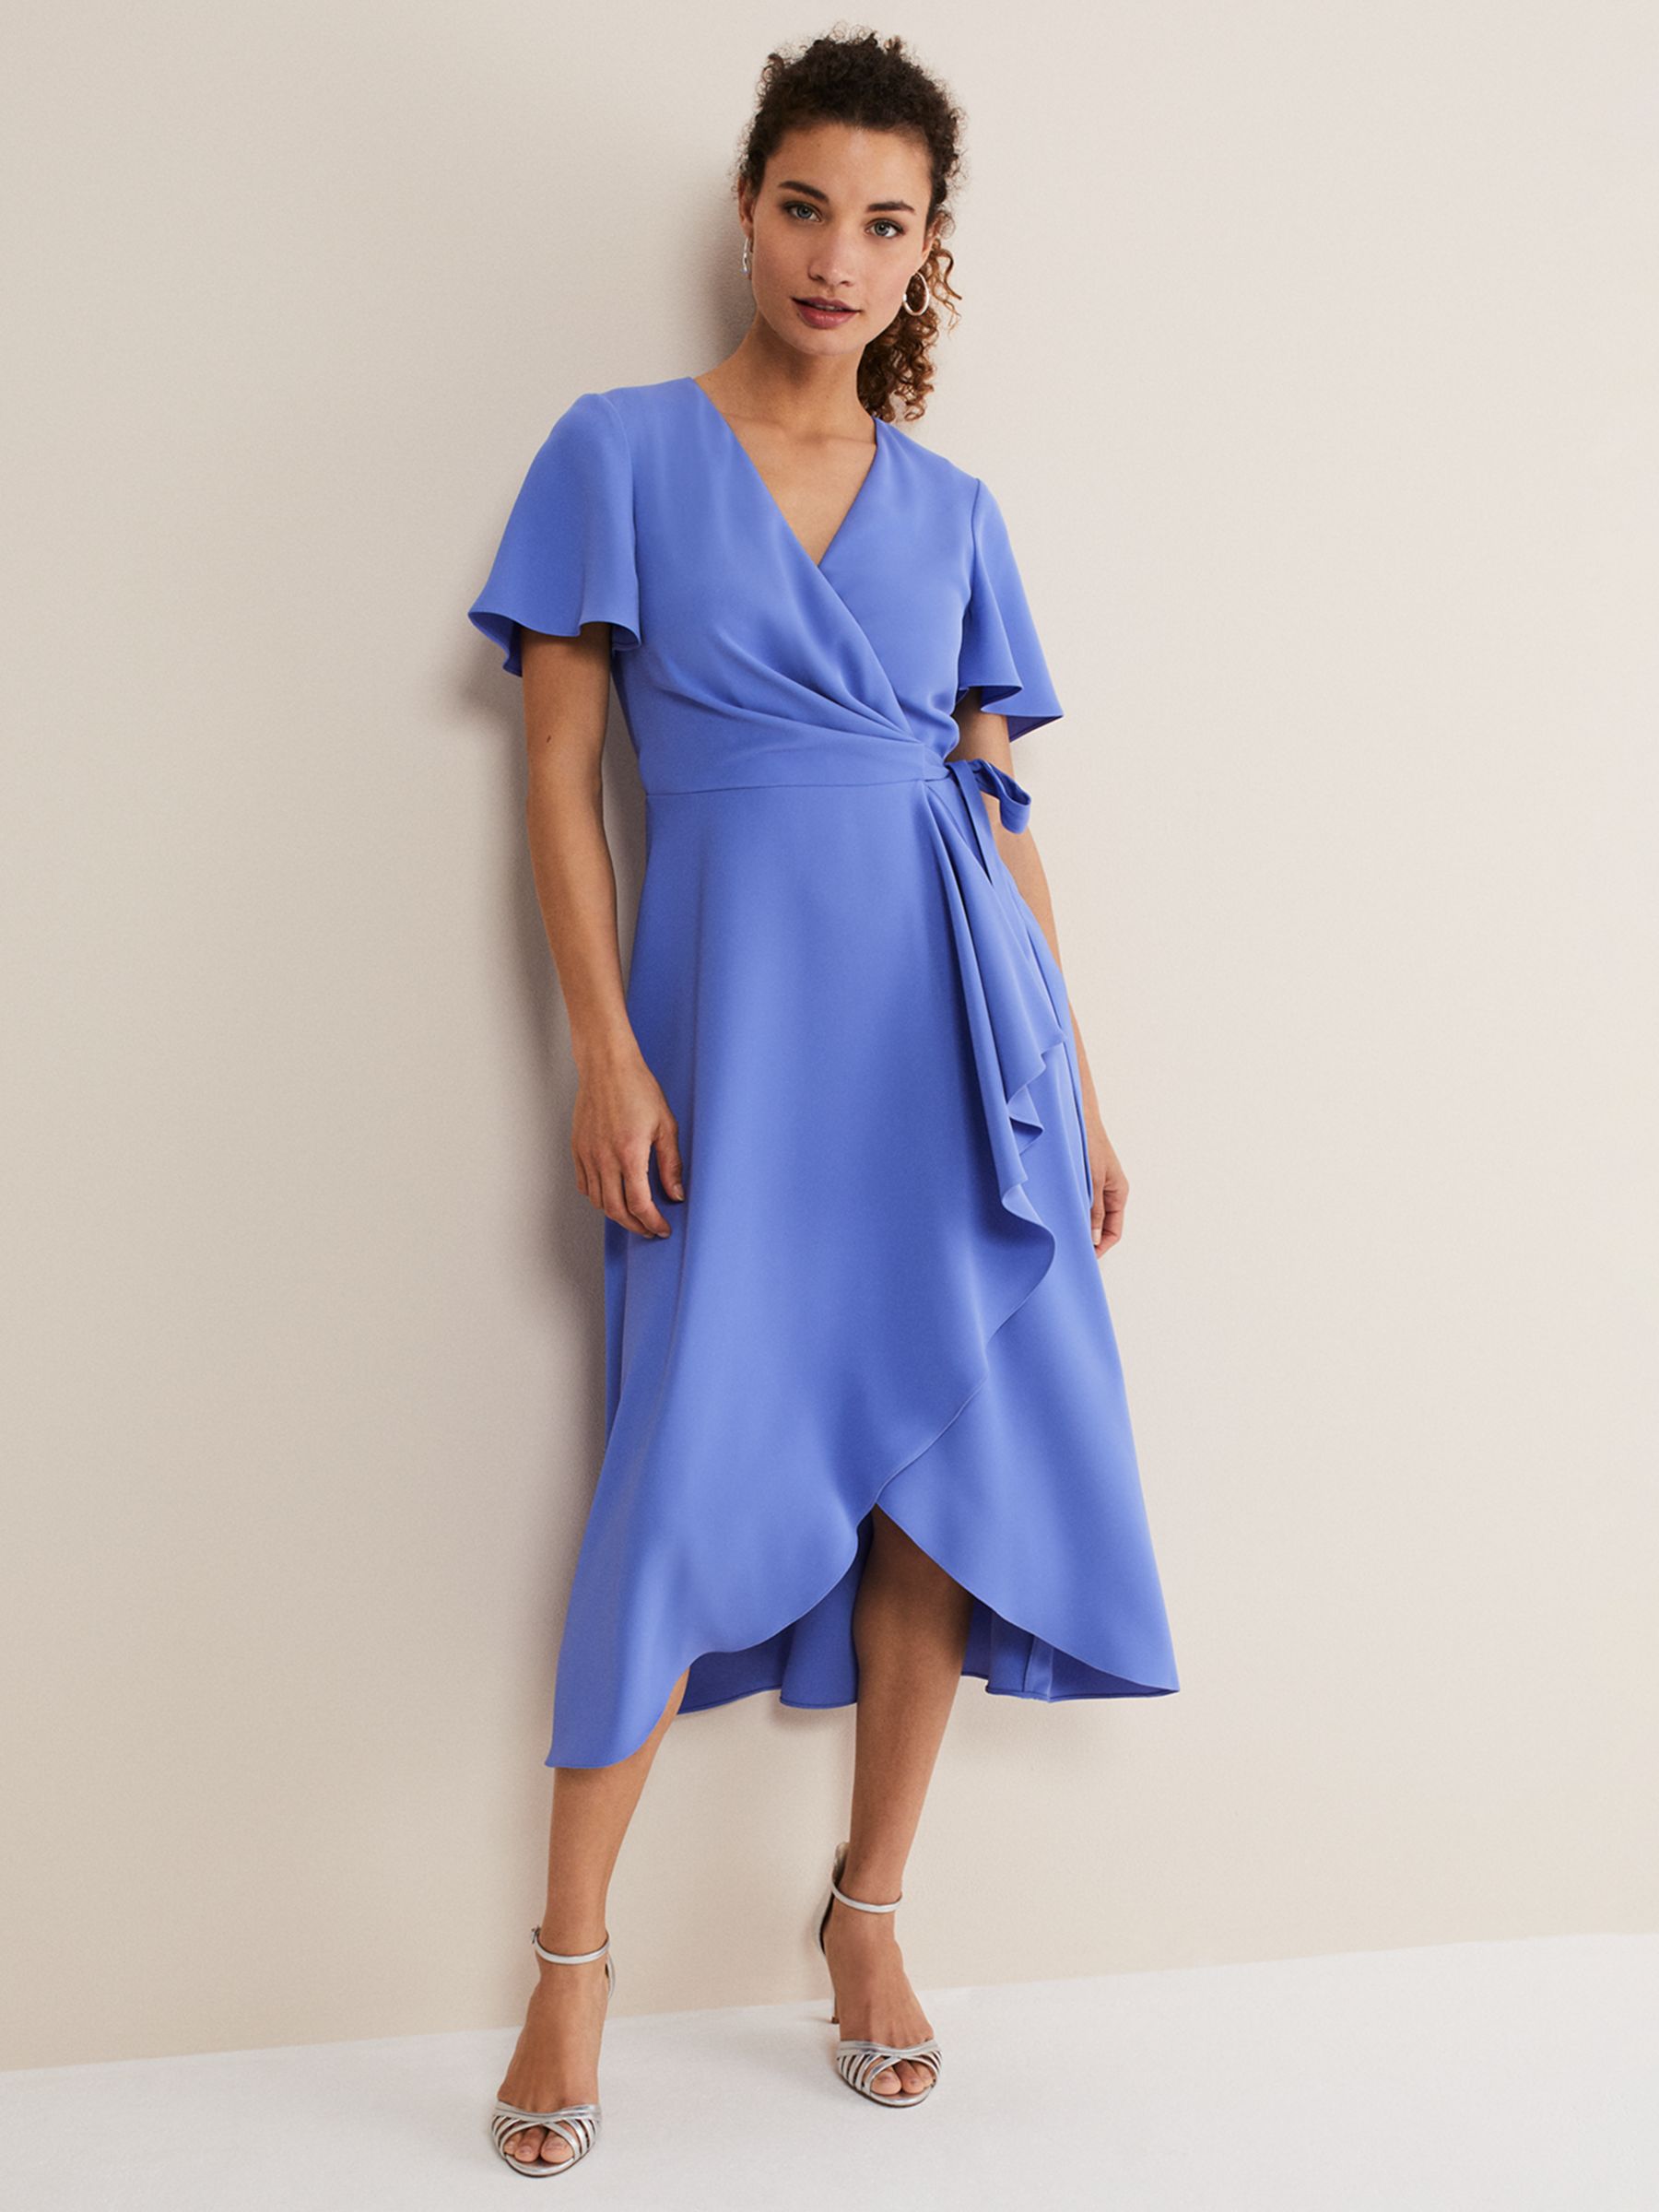 Phase Eight Blue Arielle Contrast Print Jersey Dress